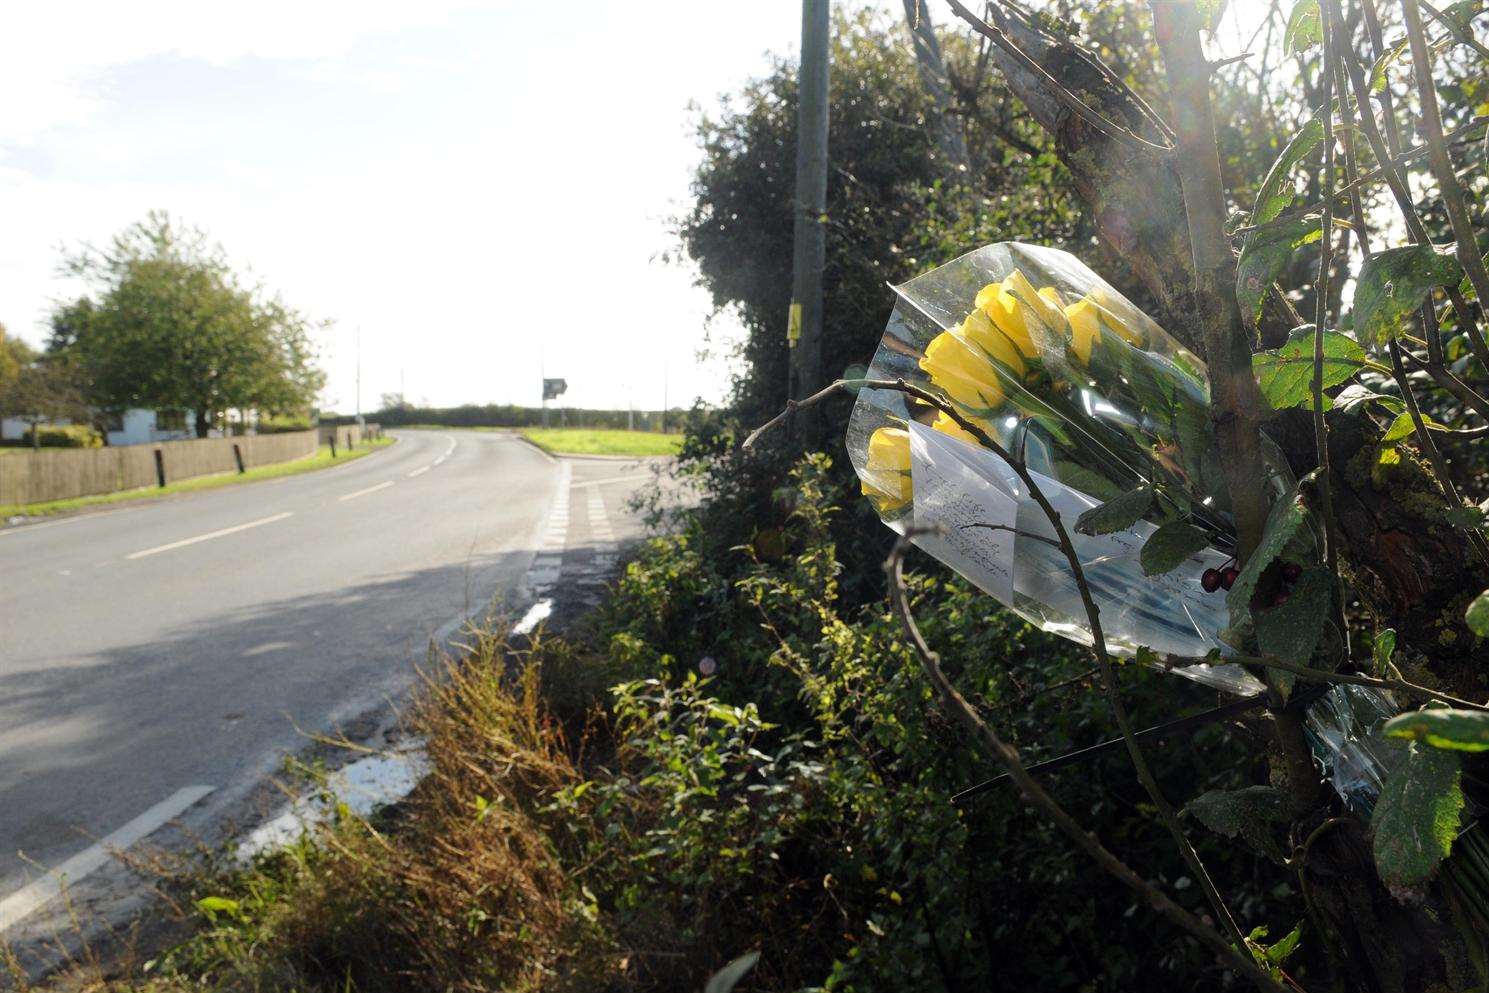 A floral tribute left at the scene of the fatal crash